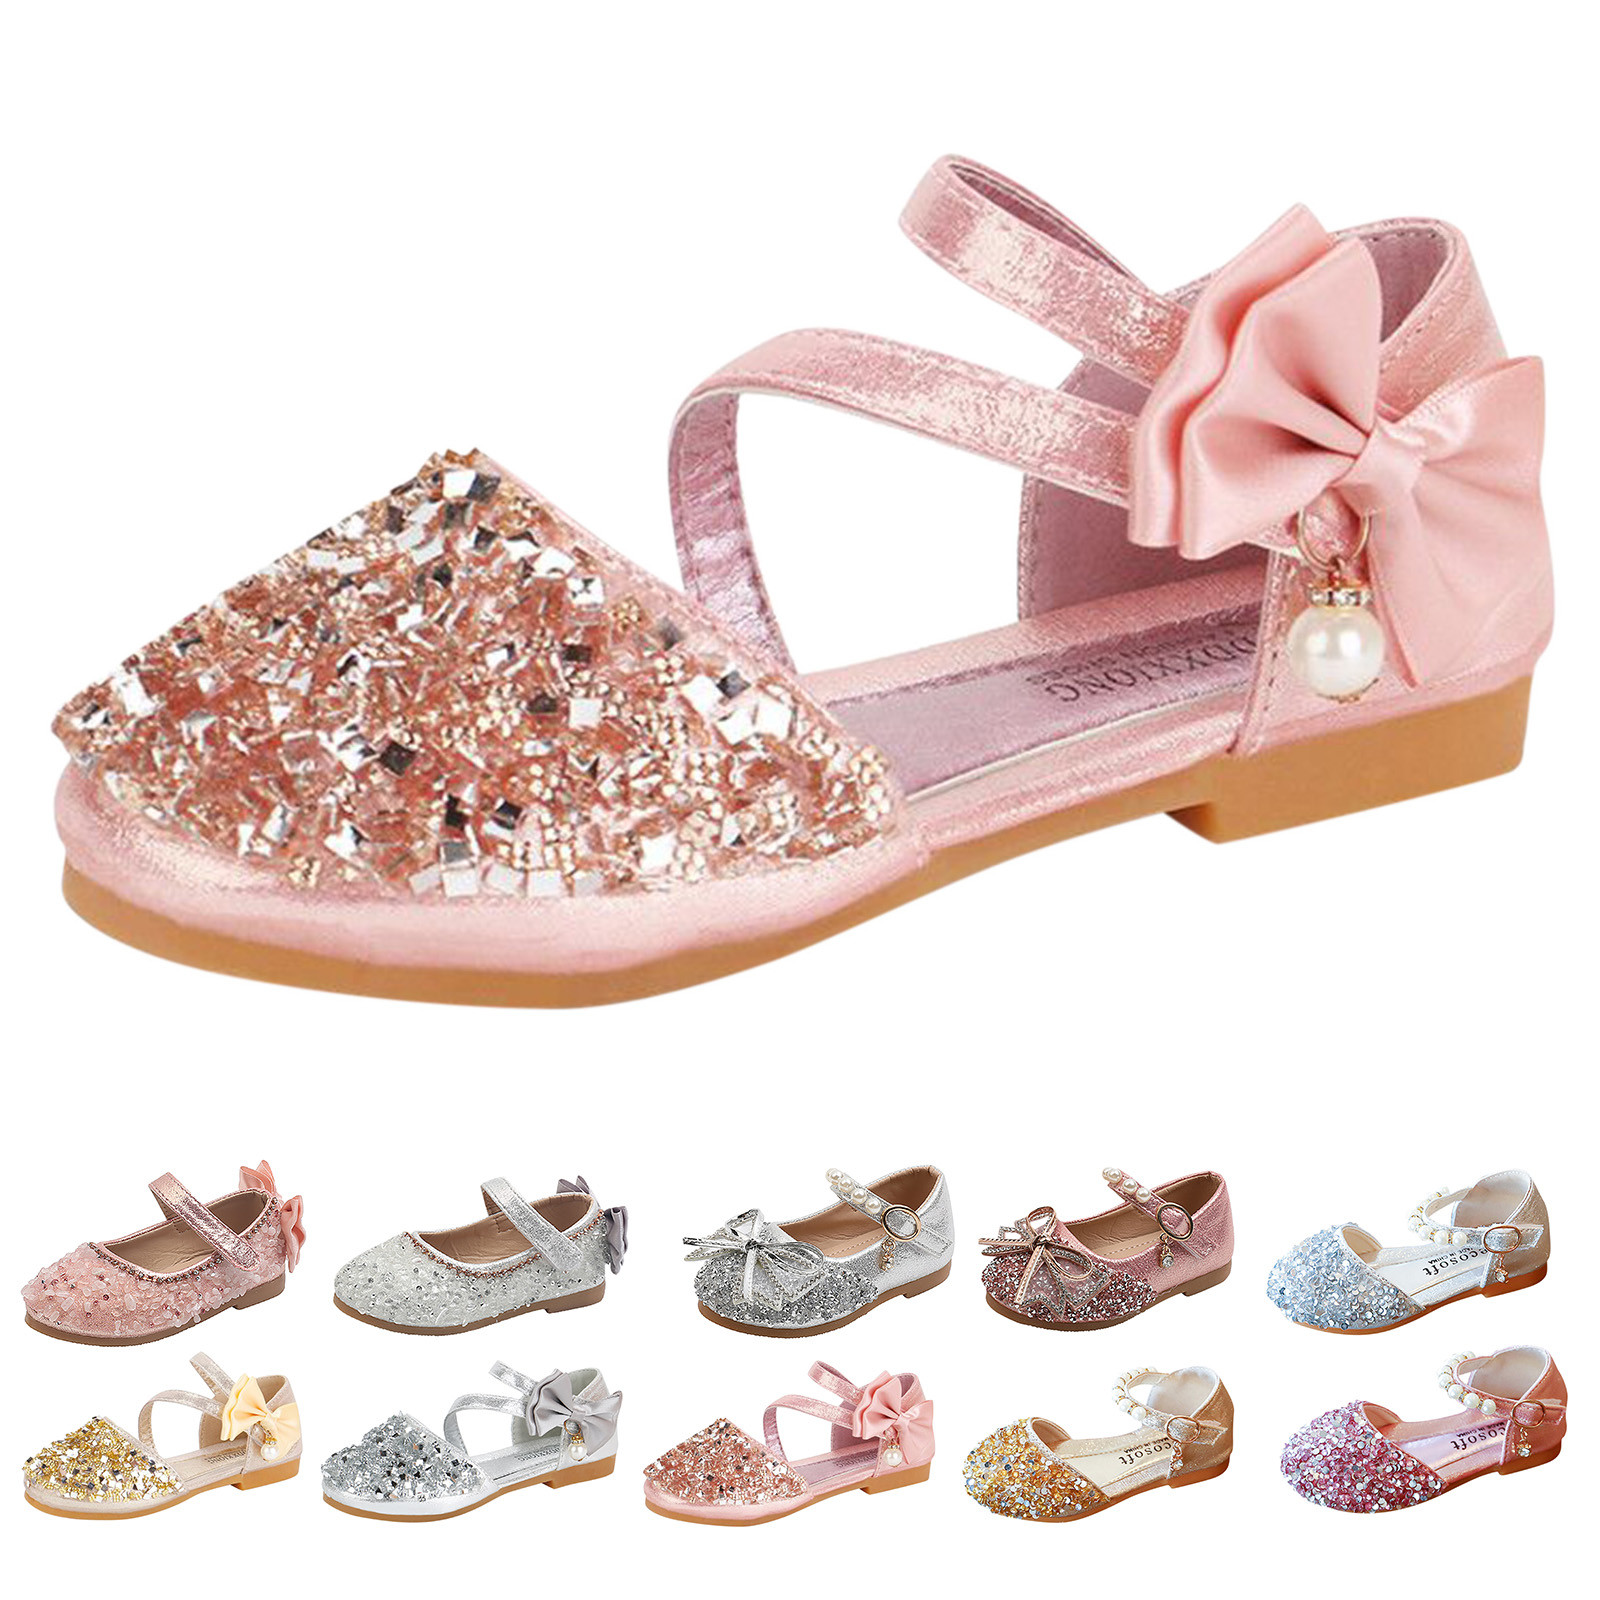 Toddler 6 Shoes Girls Single Kids Bling Shoes Baby Sandals Pearl Infant